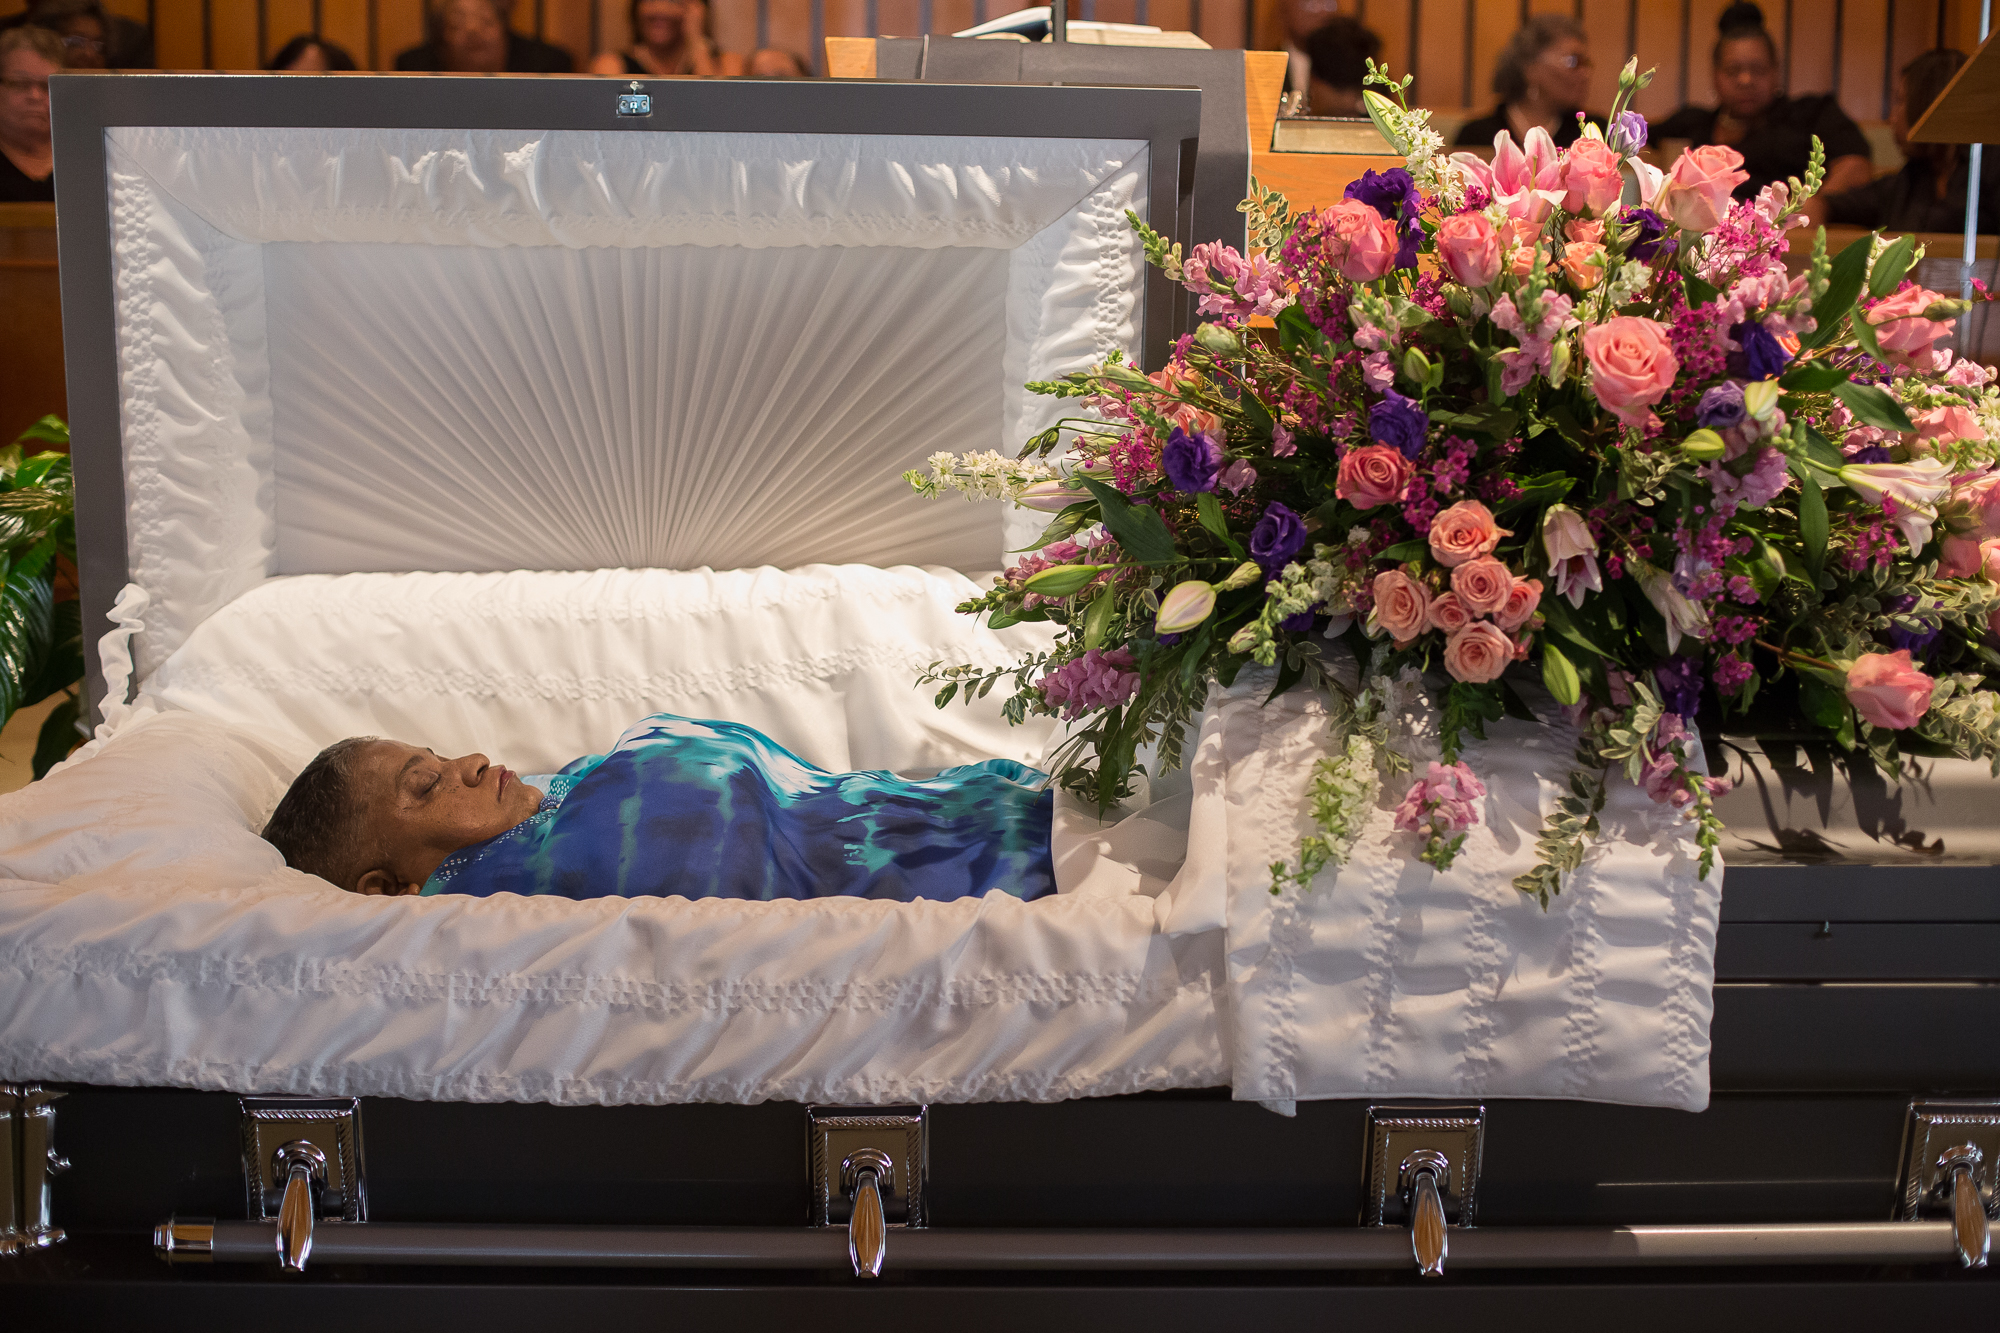  Gloria Streeter’s funeral, August 2014. Gloria died after complications from a stroke. Her son, Maurice, was killed in April 2013. Her family says she never got over her son’s death, and a broken heart contributed to her demise. 